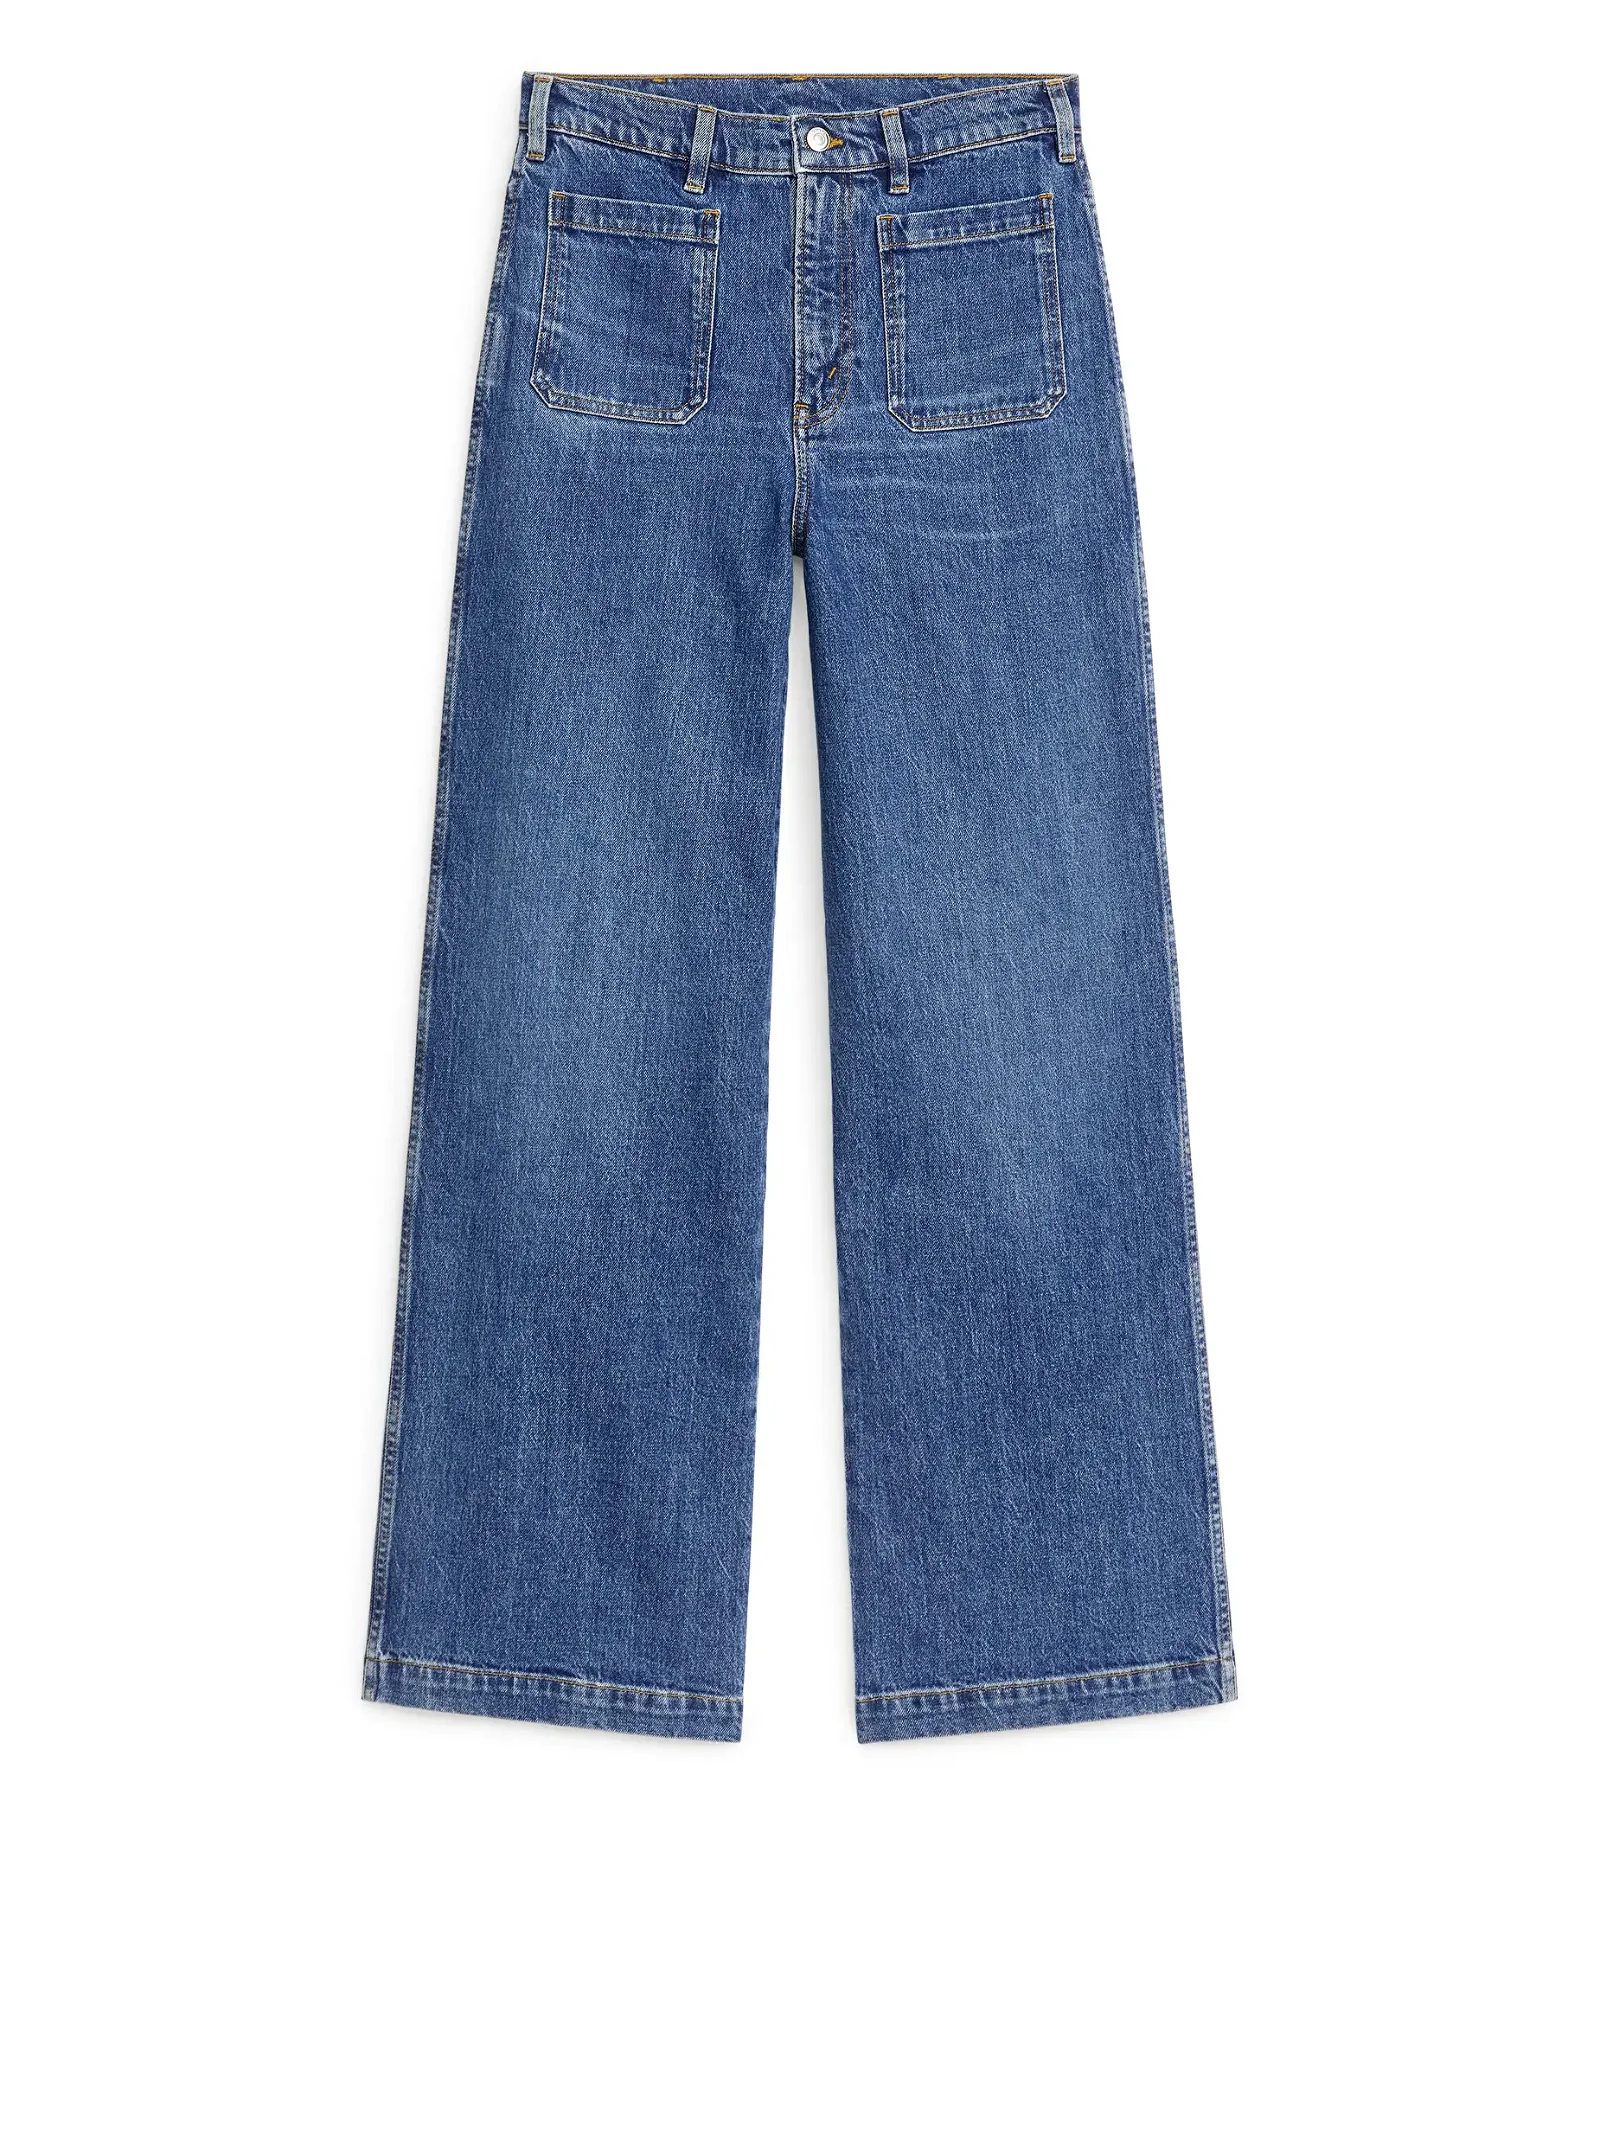 ARKET Lupine High Flared Stretch Jeans in Blue | Endource